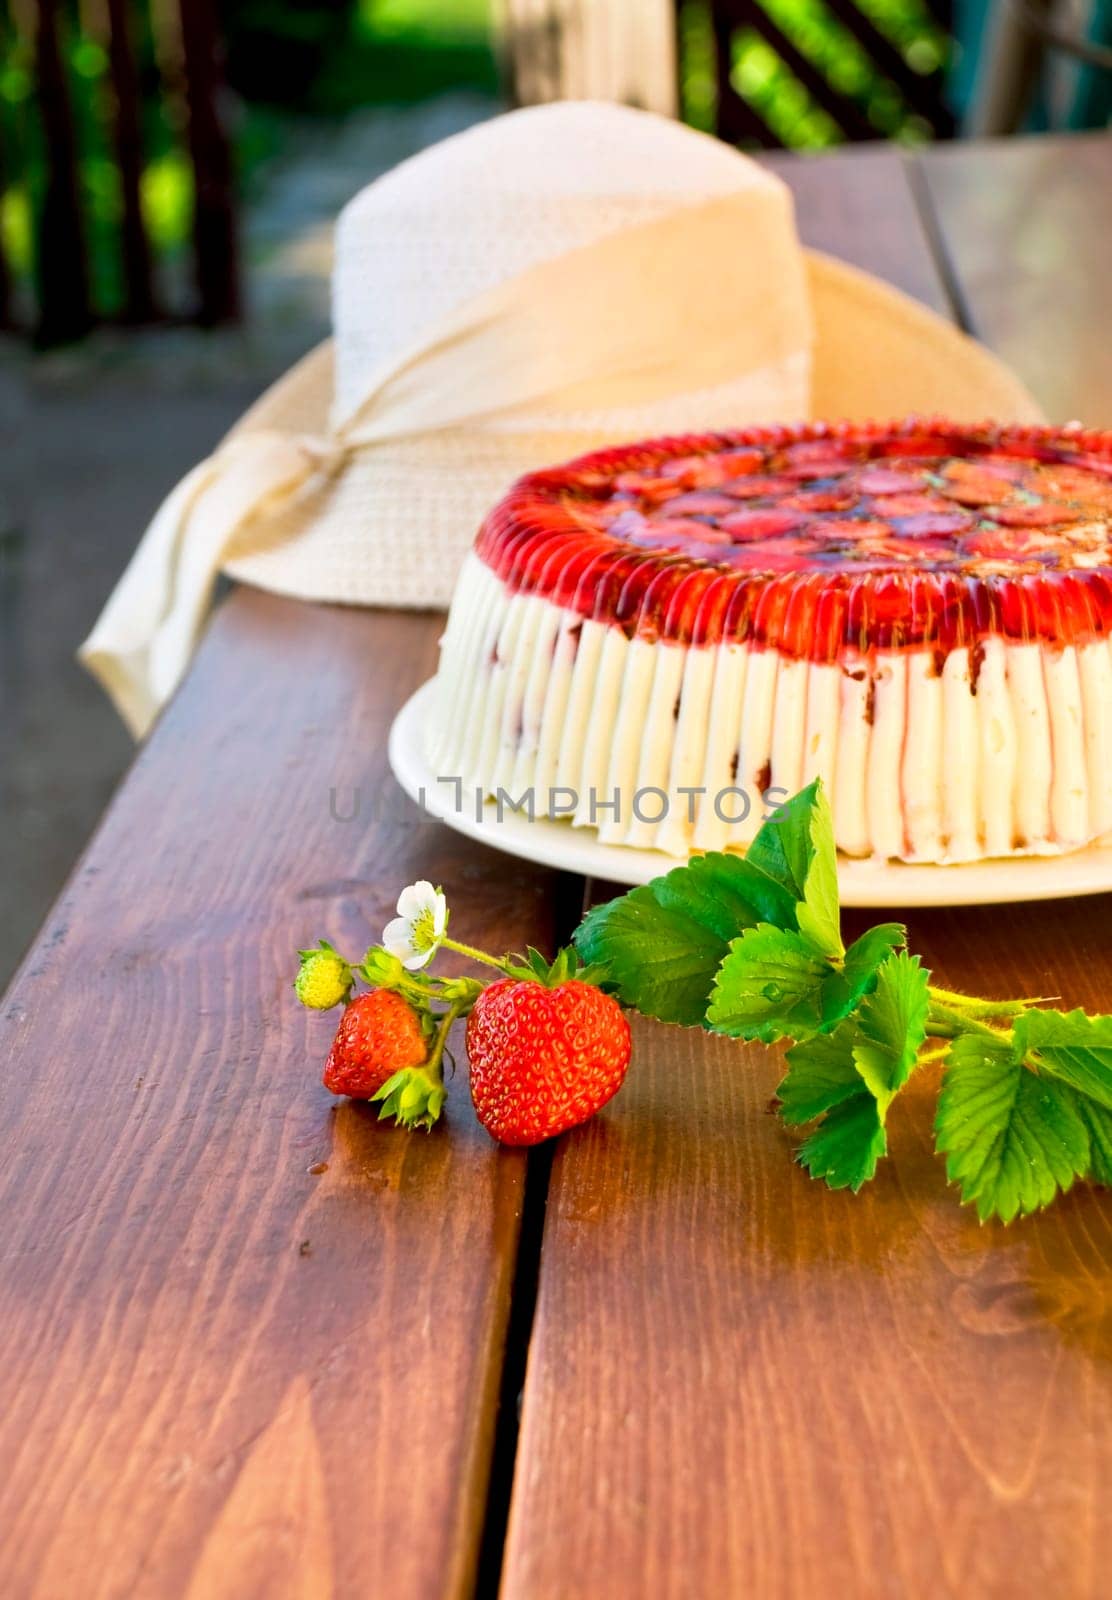 Cake with strawberries and whipped cream decorated with leaves on wooden background